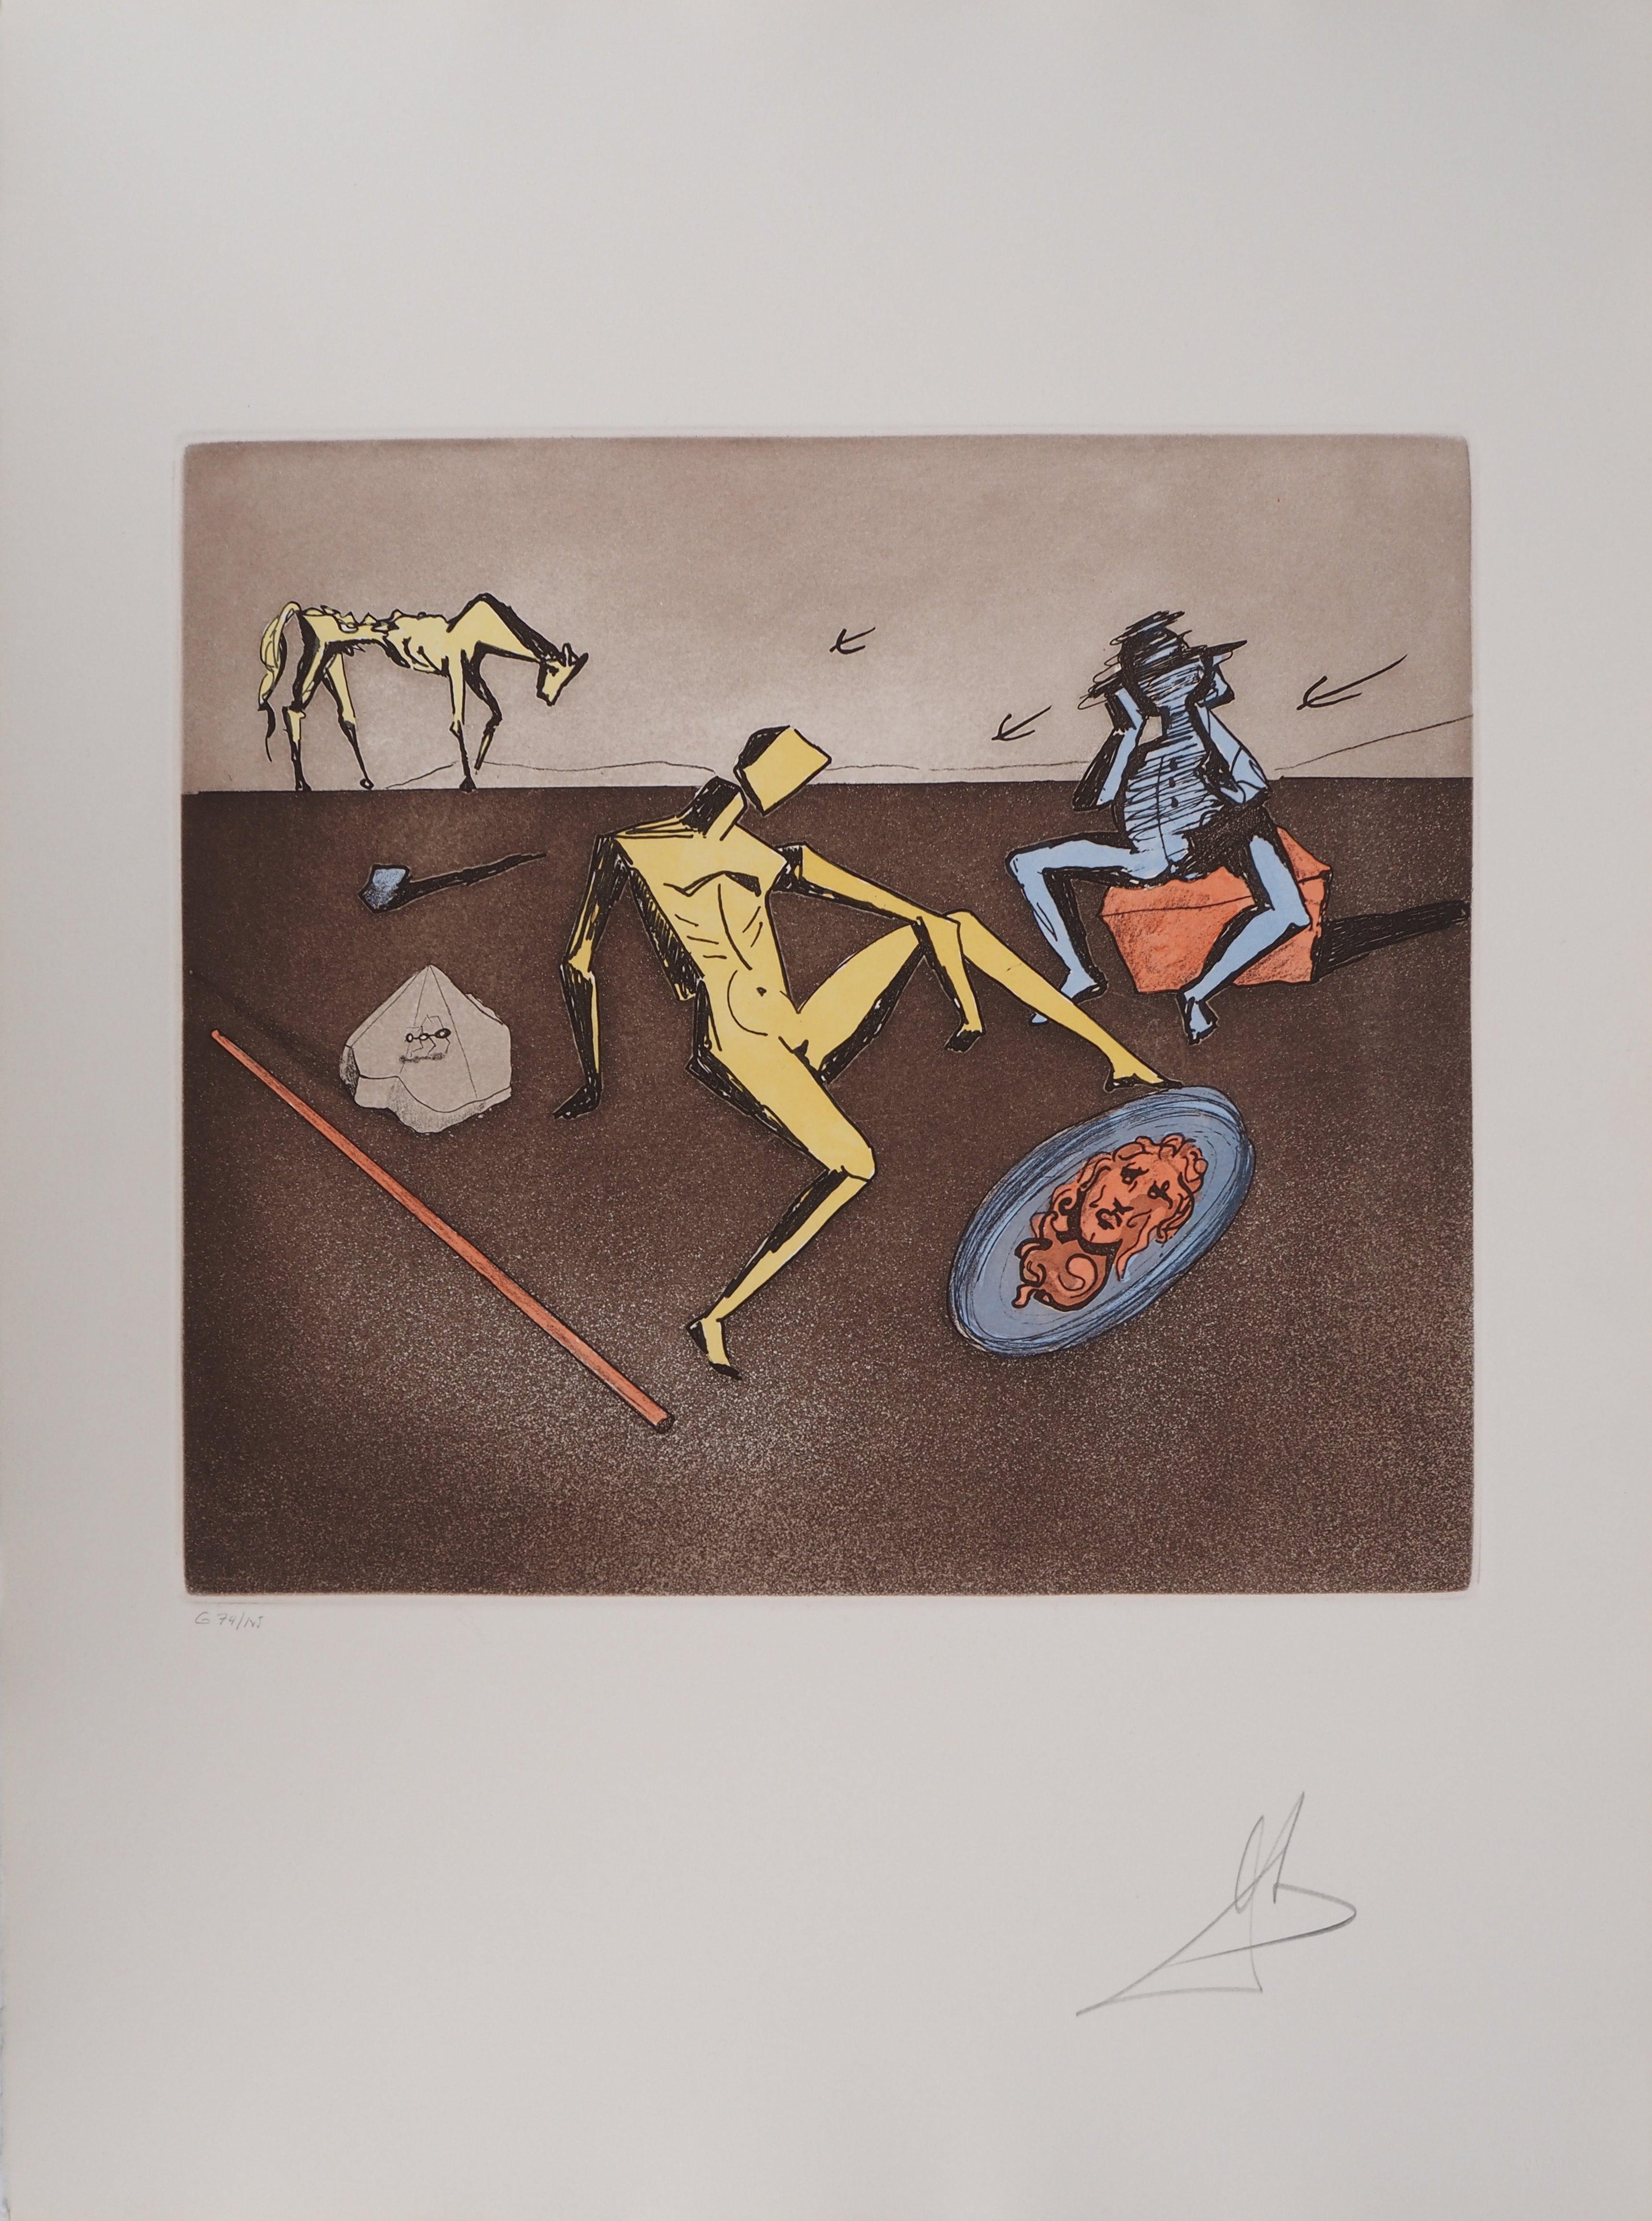 Are Salvador Dalí lithographs valuable?